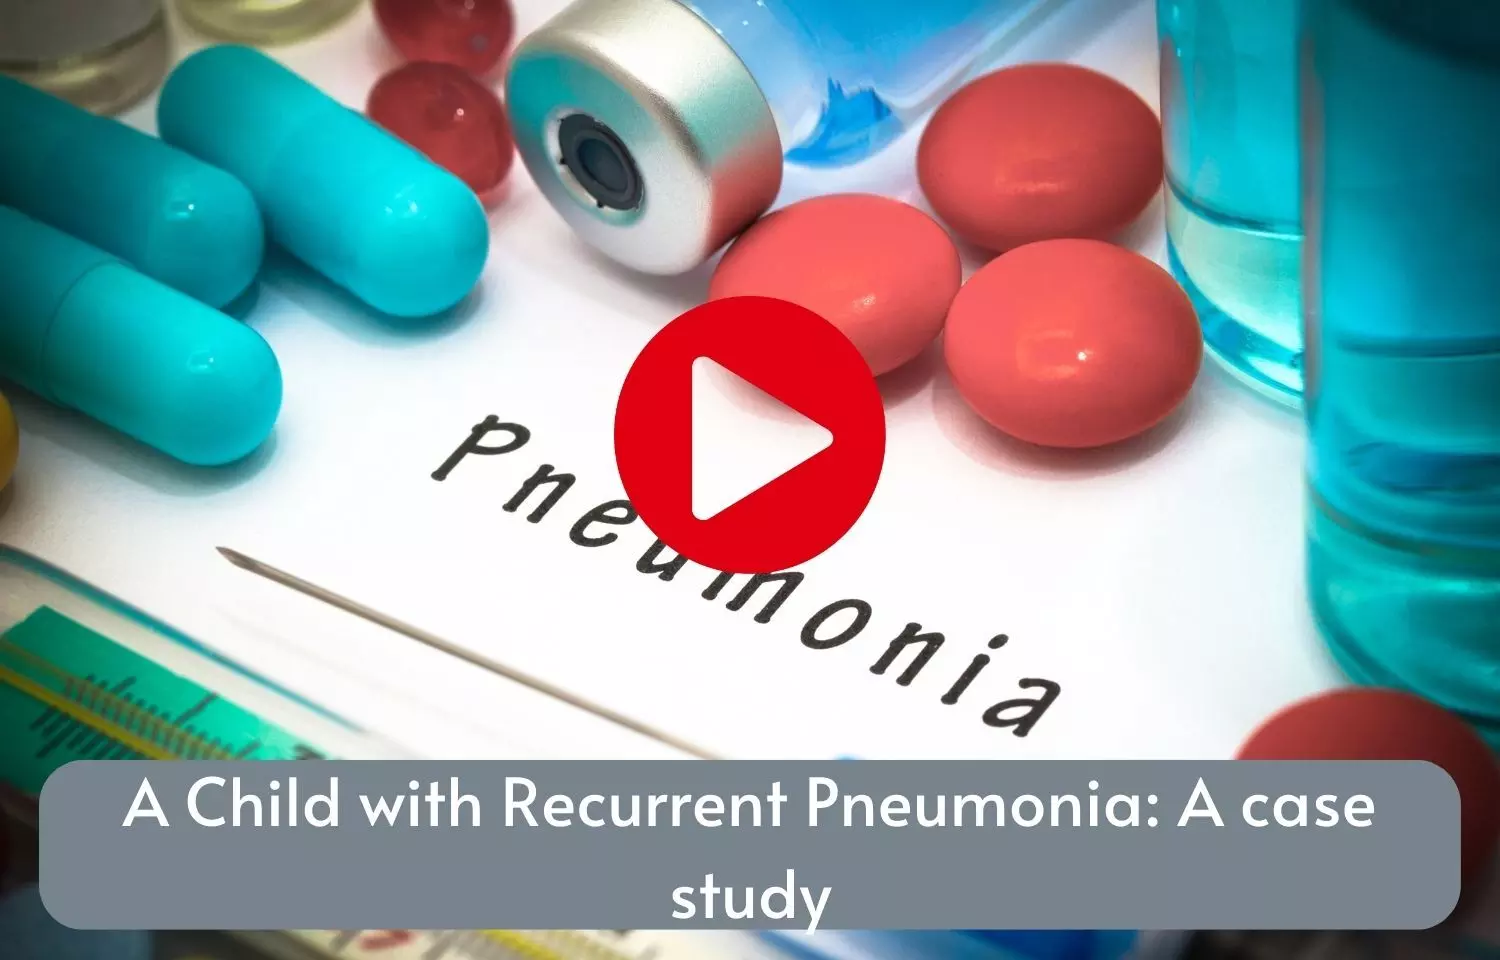 A Child with Recurrent Pneumonia: A case study